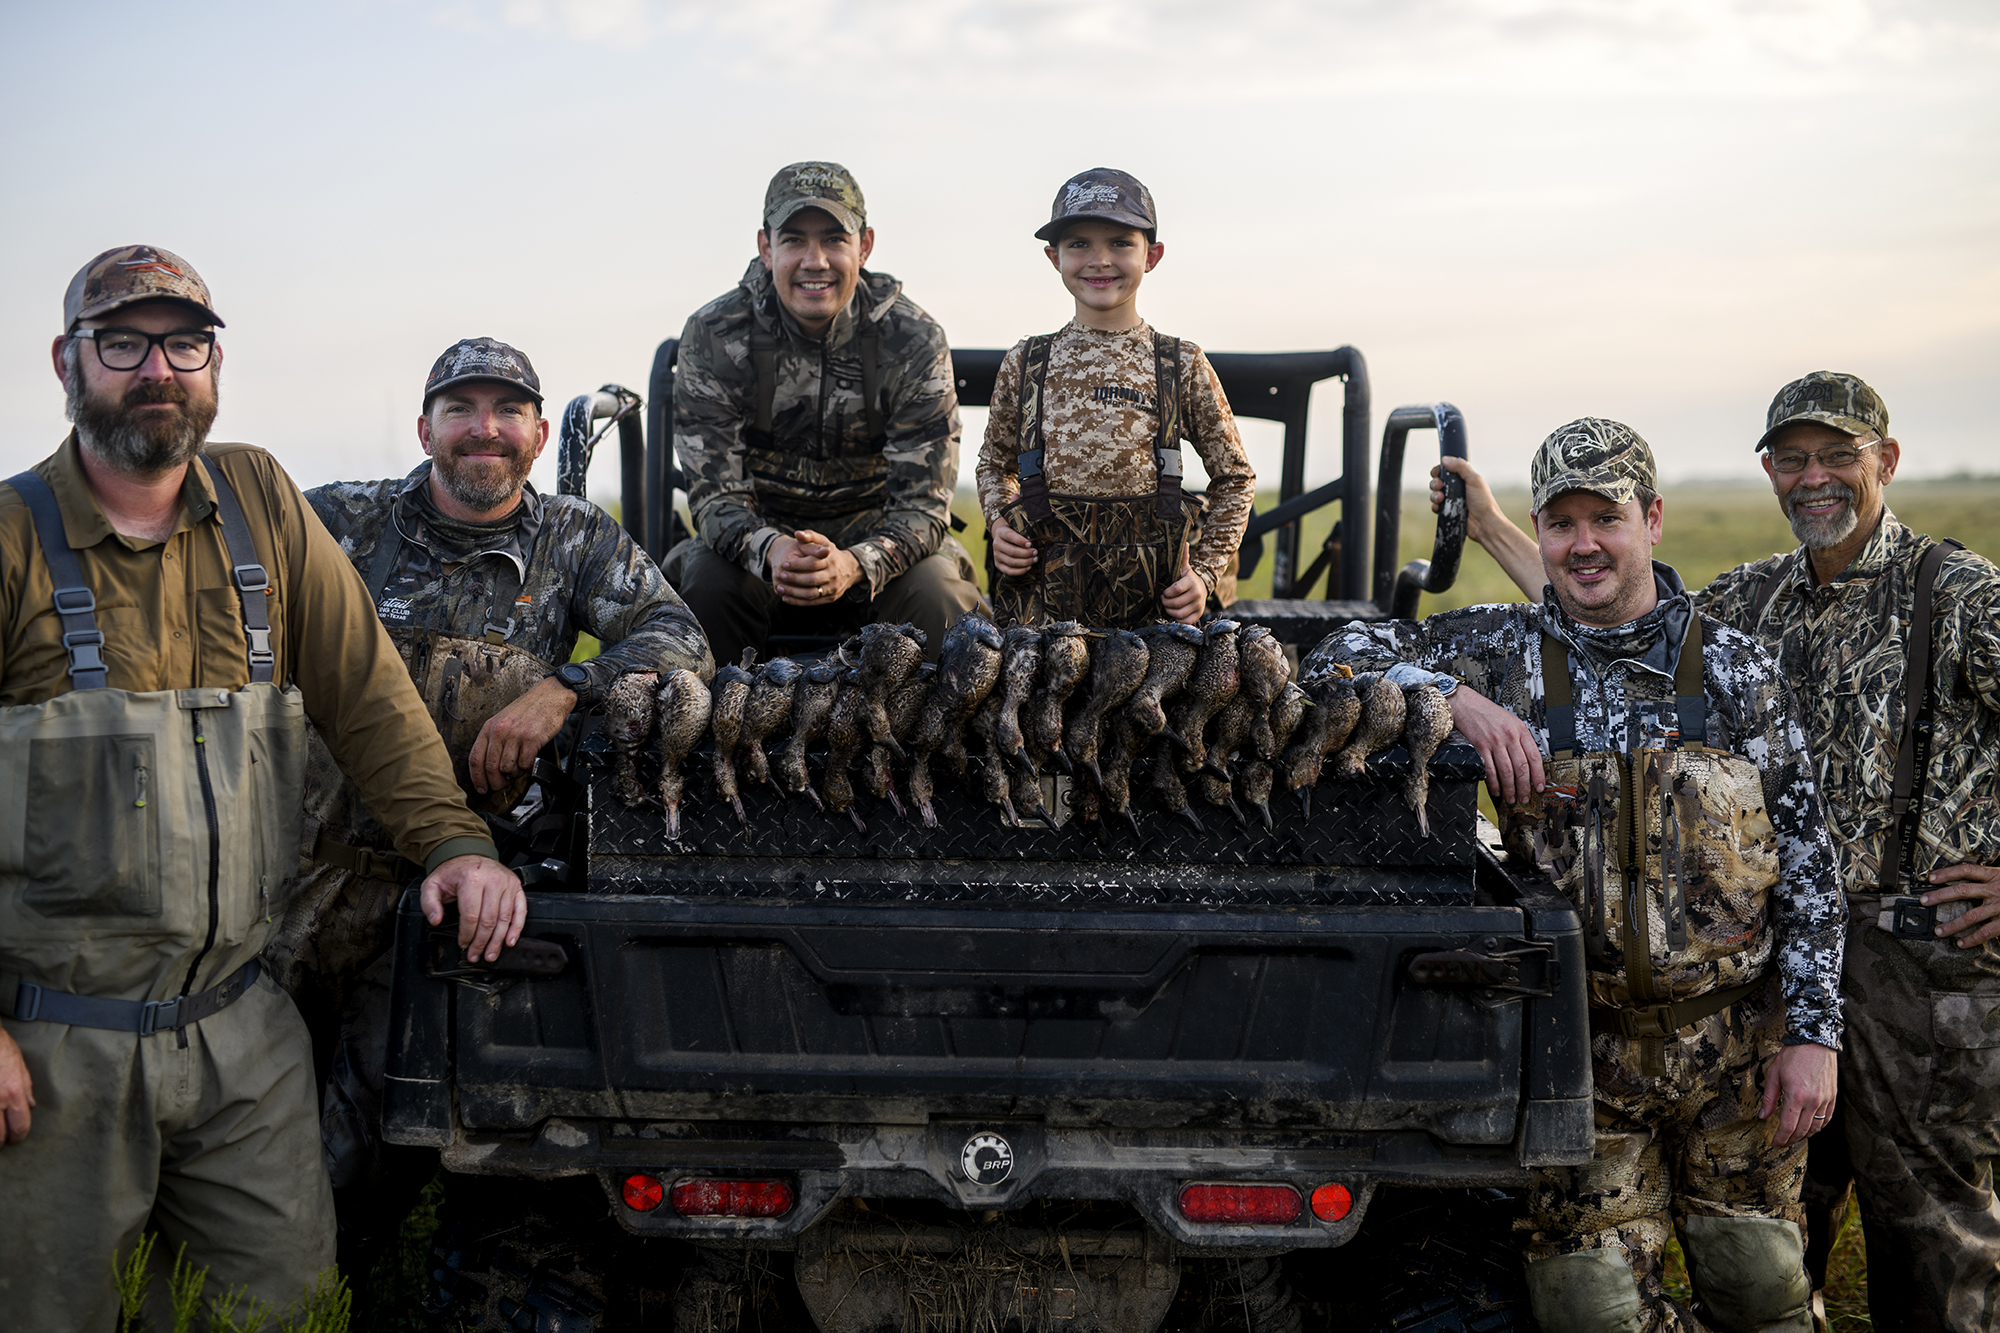 Stay Alert While Duck Hunting Without a Gun